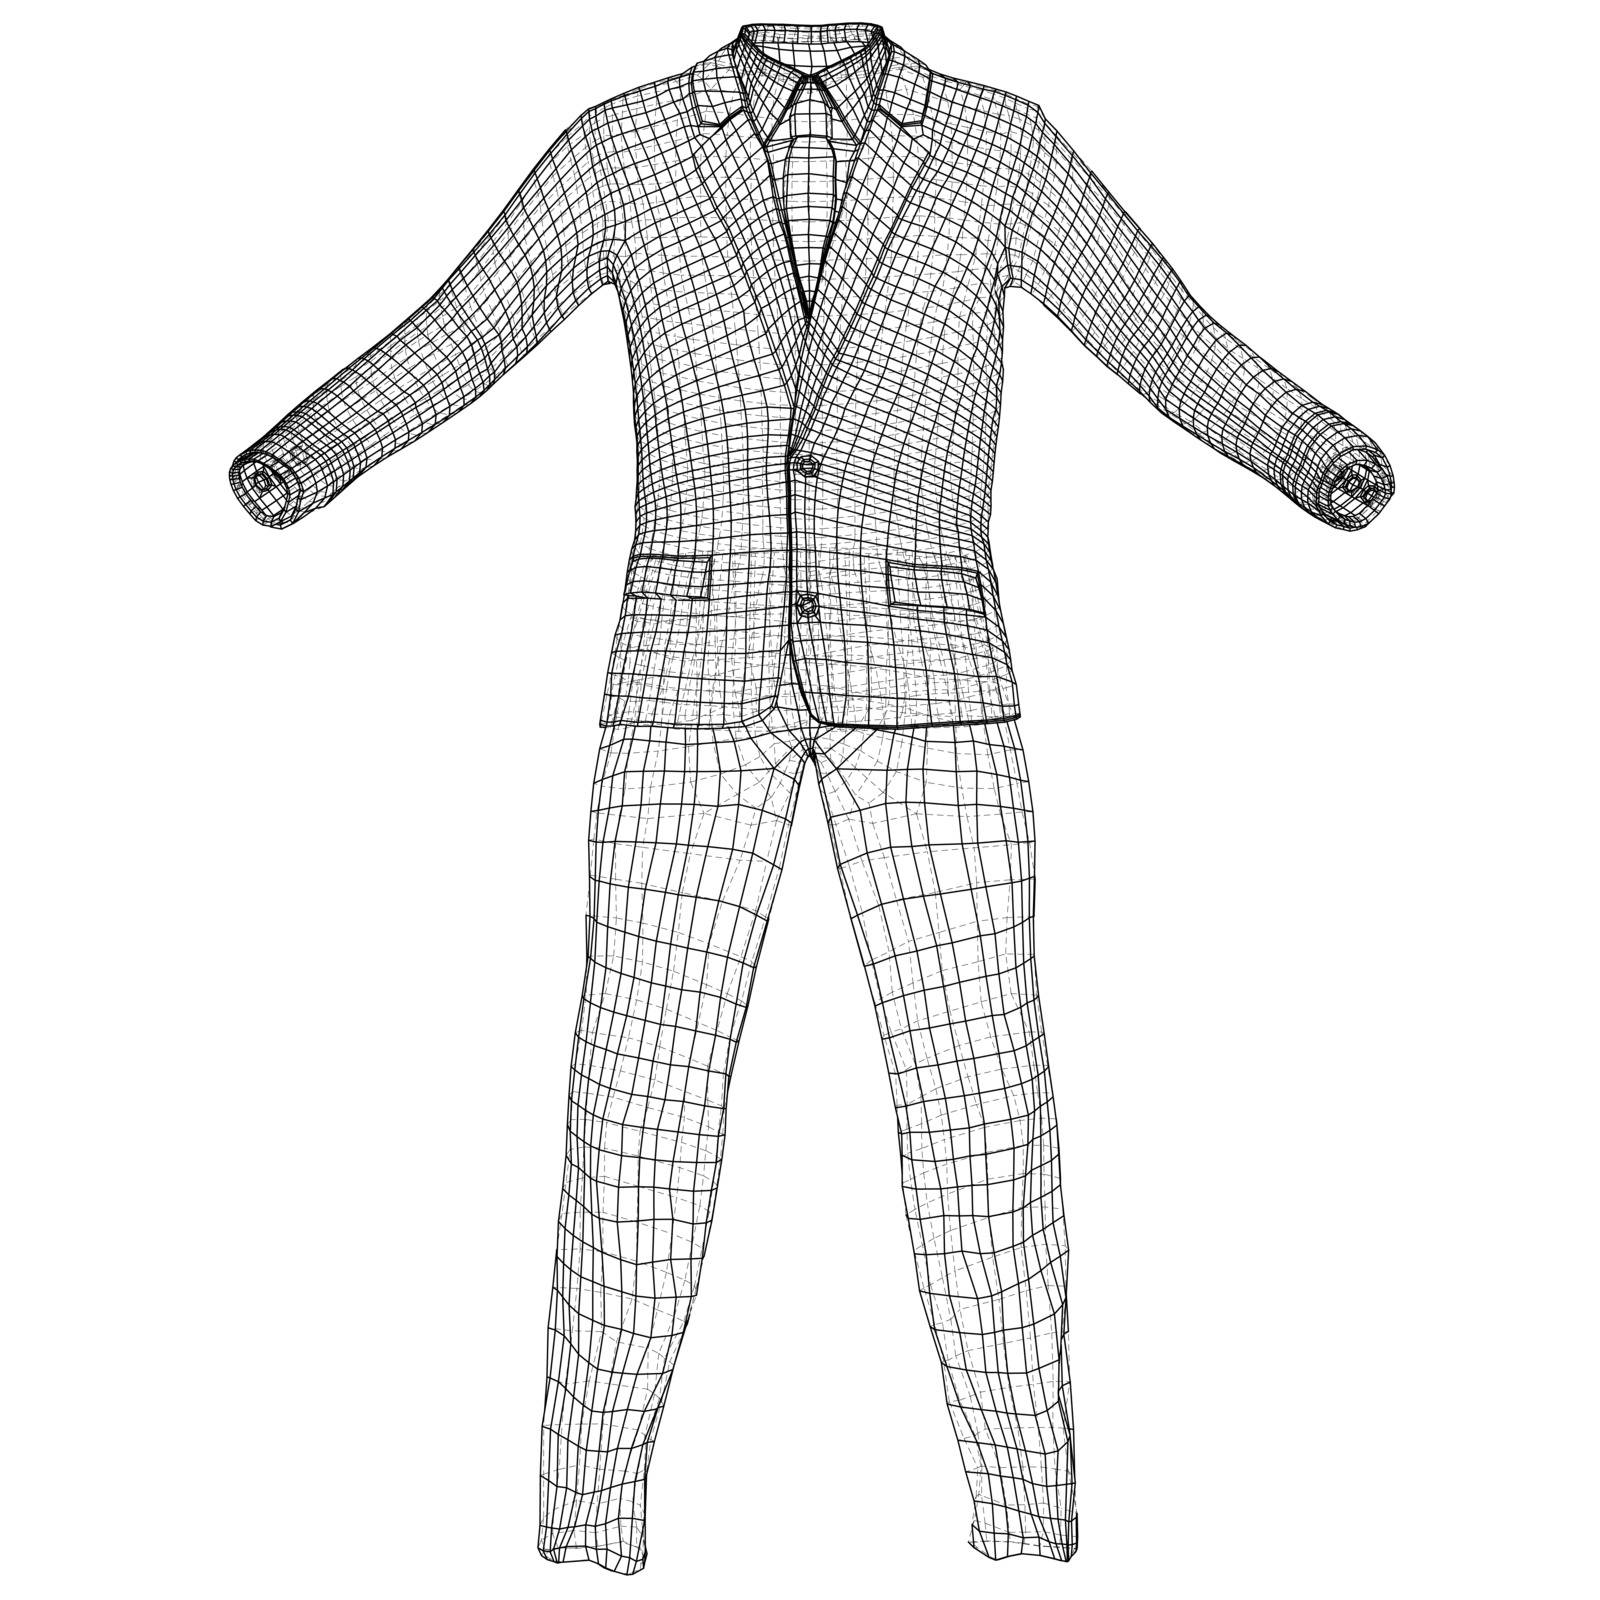 Mans suit in wire-frame style by cherezoff